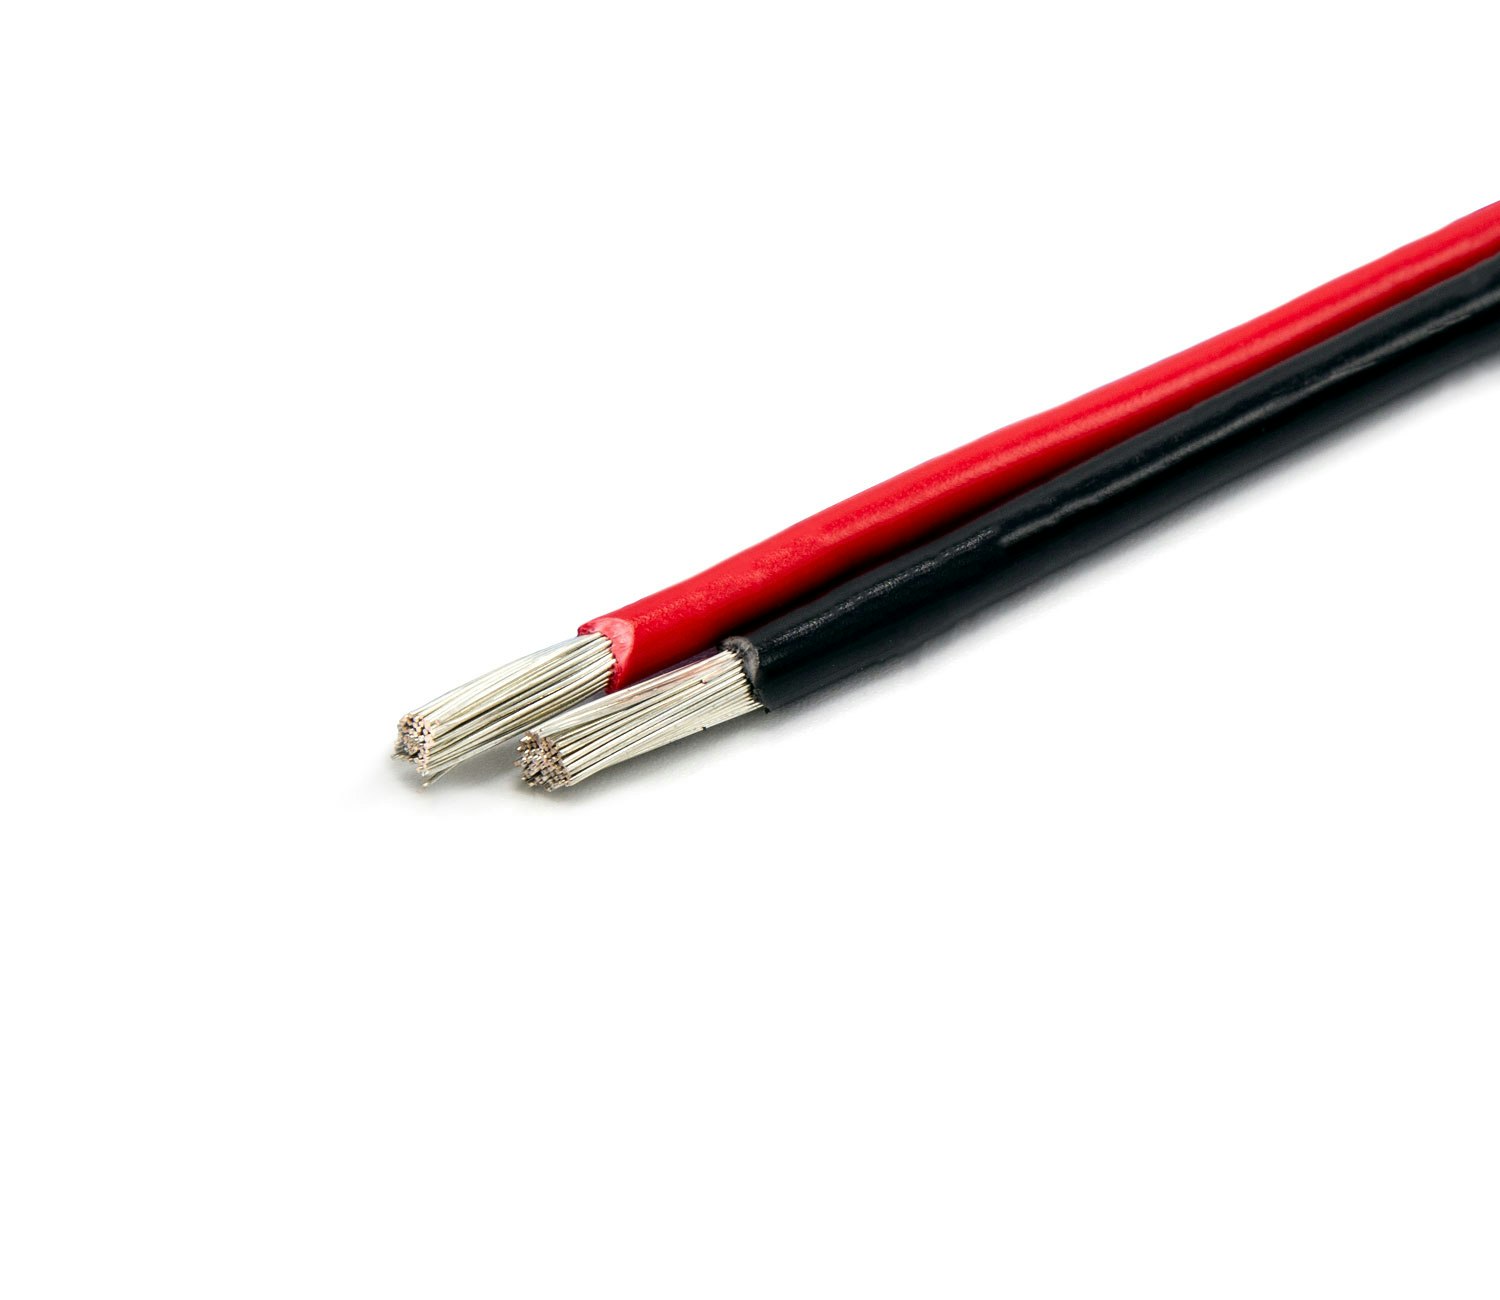  OCEANFLEX - Tinned electric cable 6mm2, 30m, Red